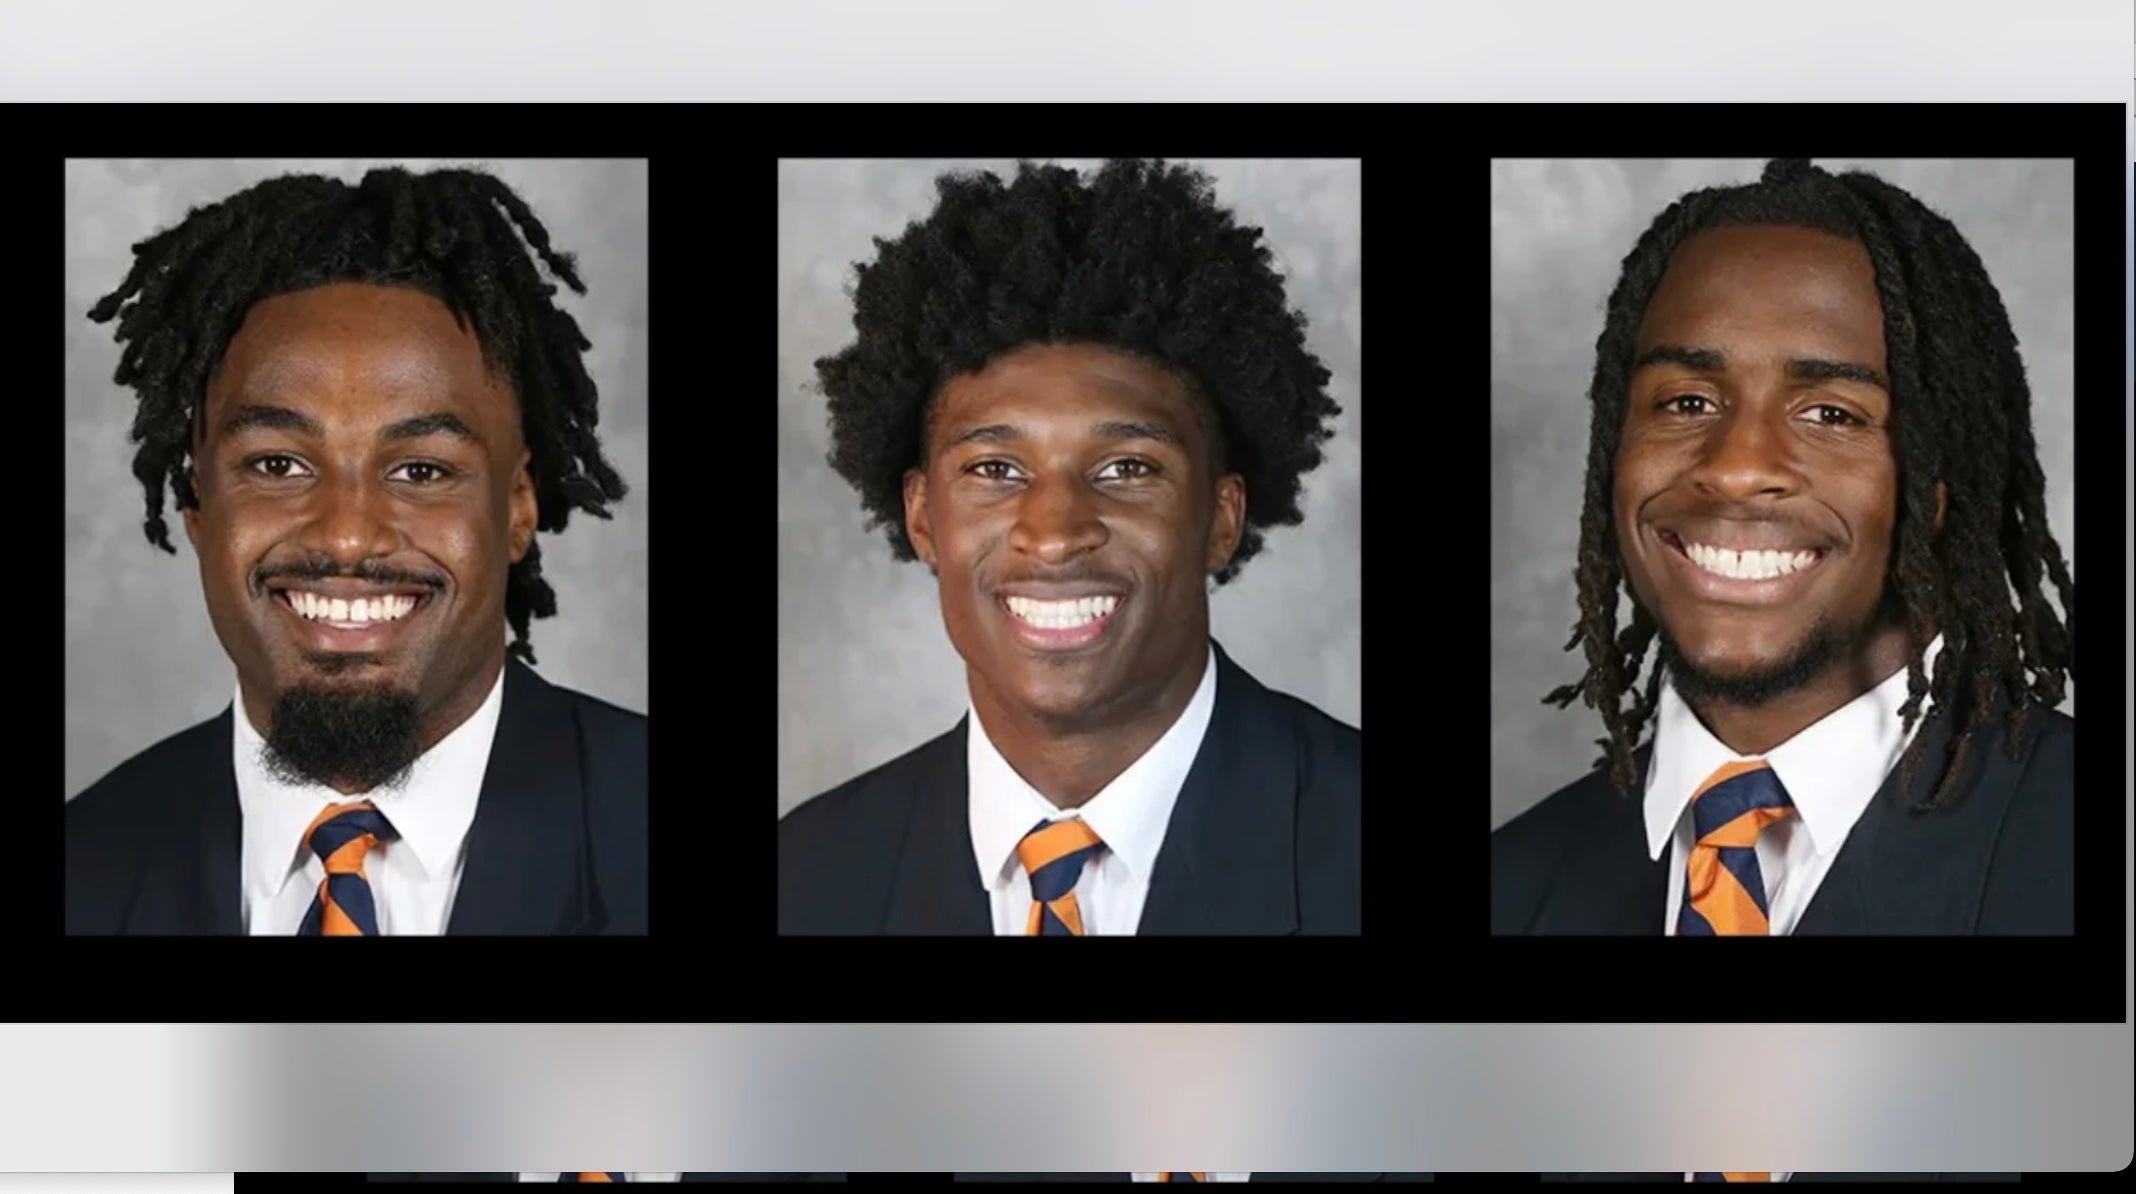 UVA Football Players Killed In School Shooting Honored With Posthumous Degrees